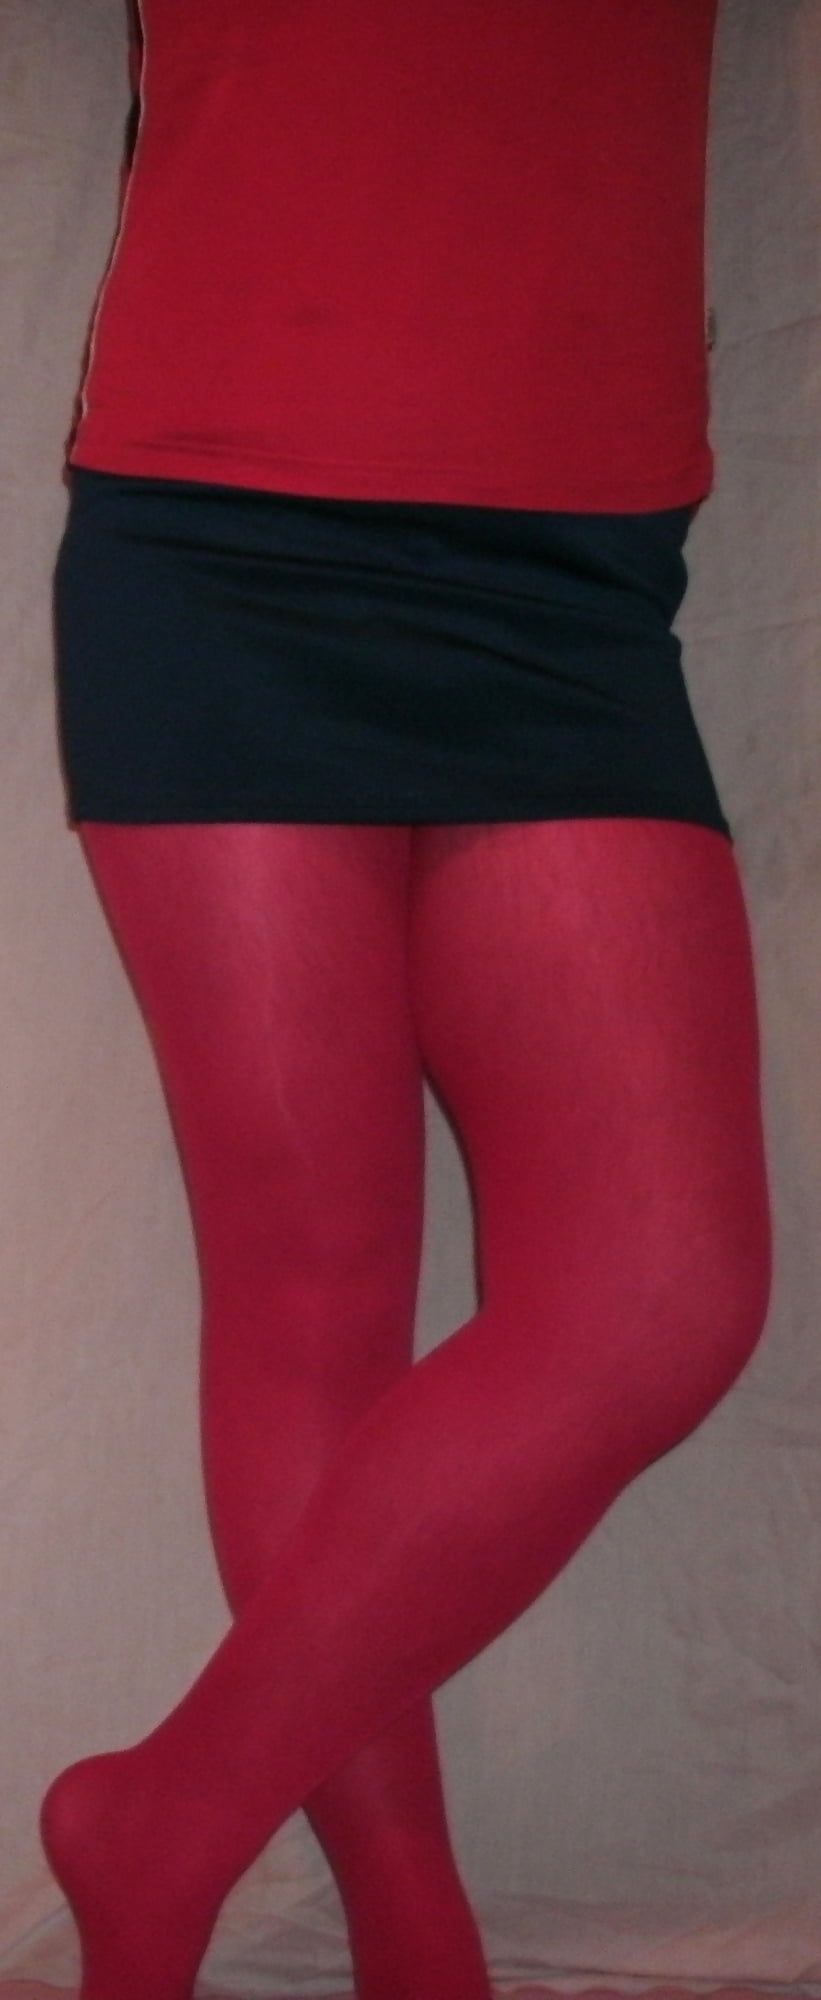 Red stockings #5